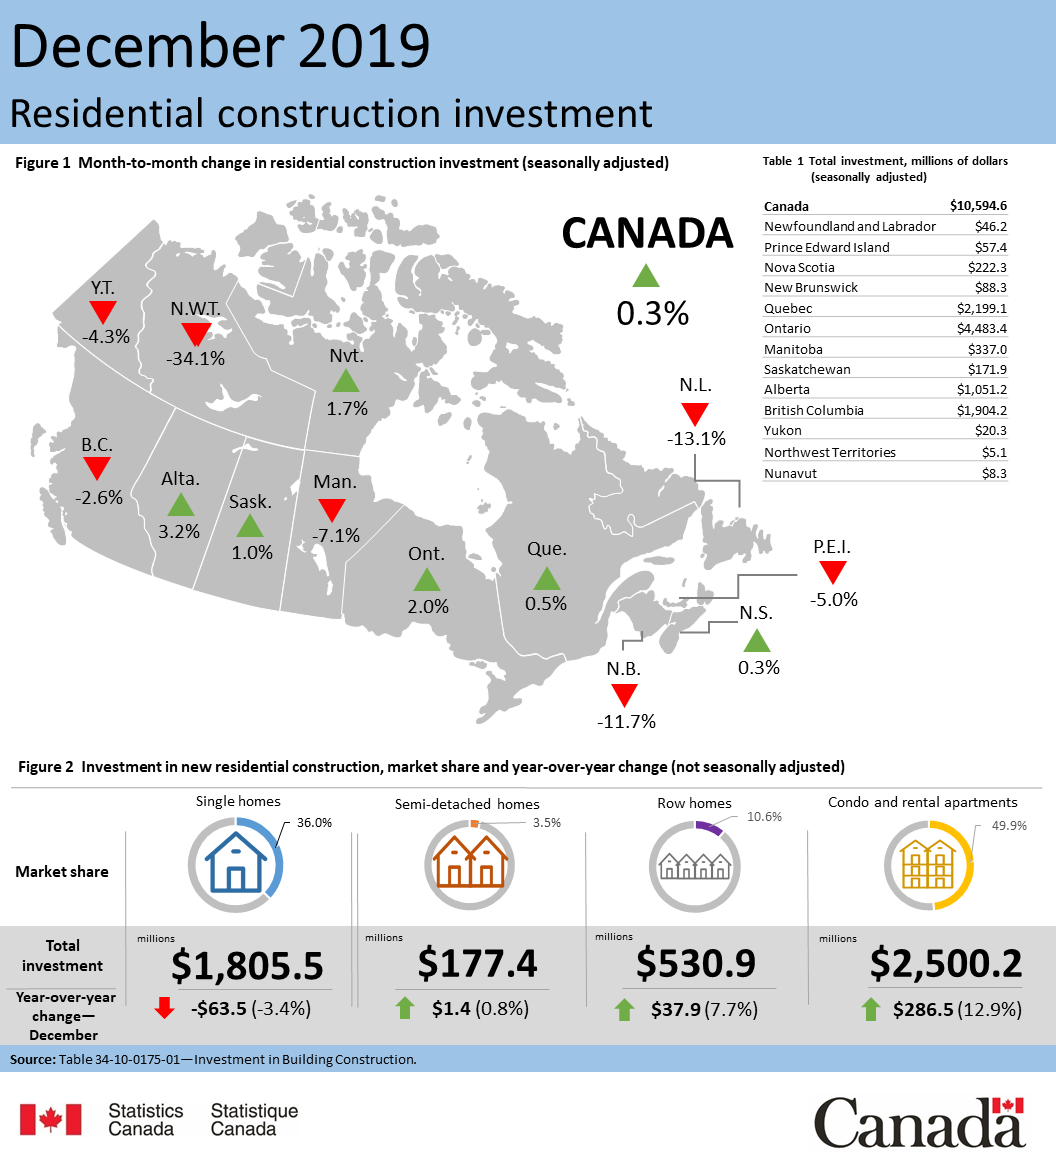 Thumbnail for Infographic 1: Residential construction investment, December 2019